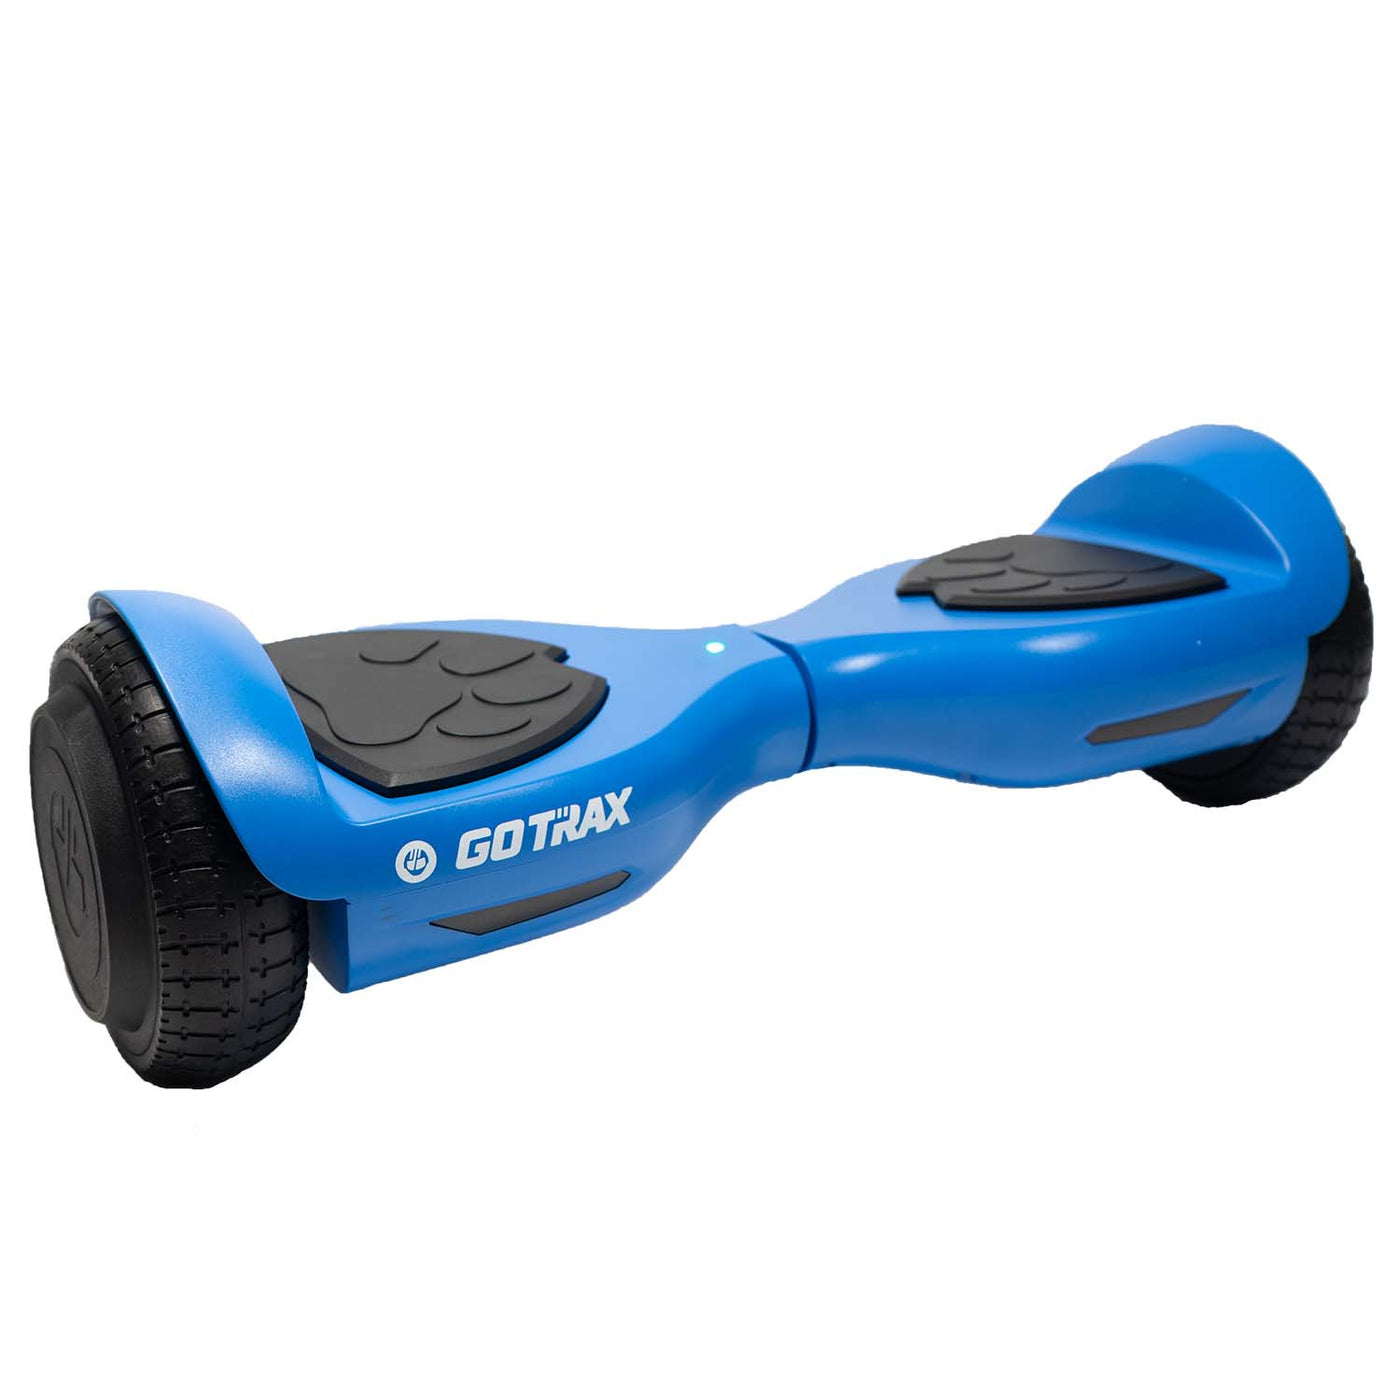 Lil Cub Hoverboard For Kids 6.5" - GOTRAX